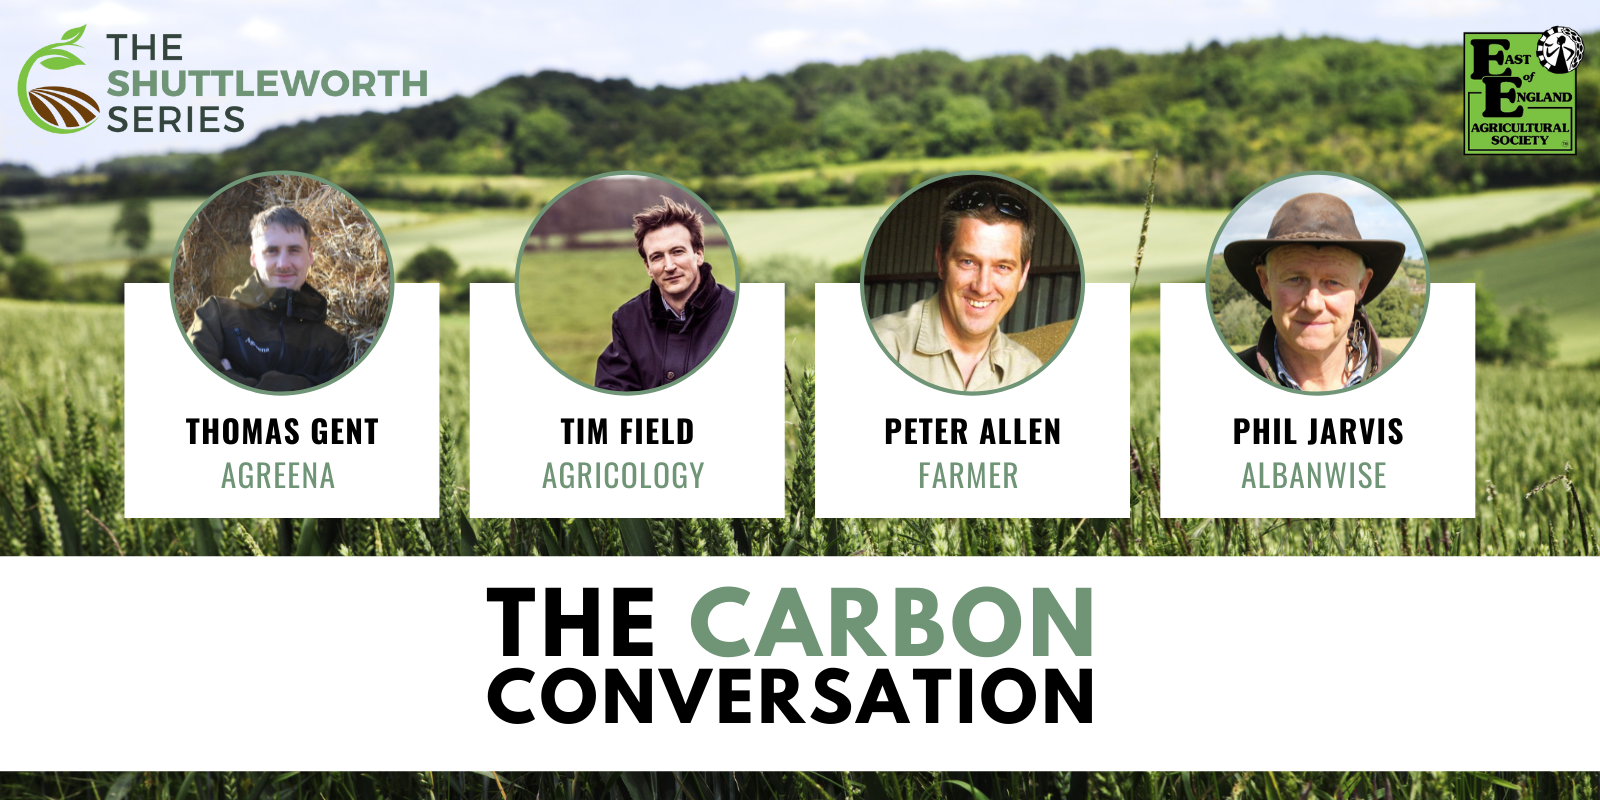 Introducing our Carbon Conversationalists